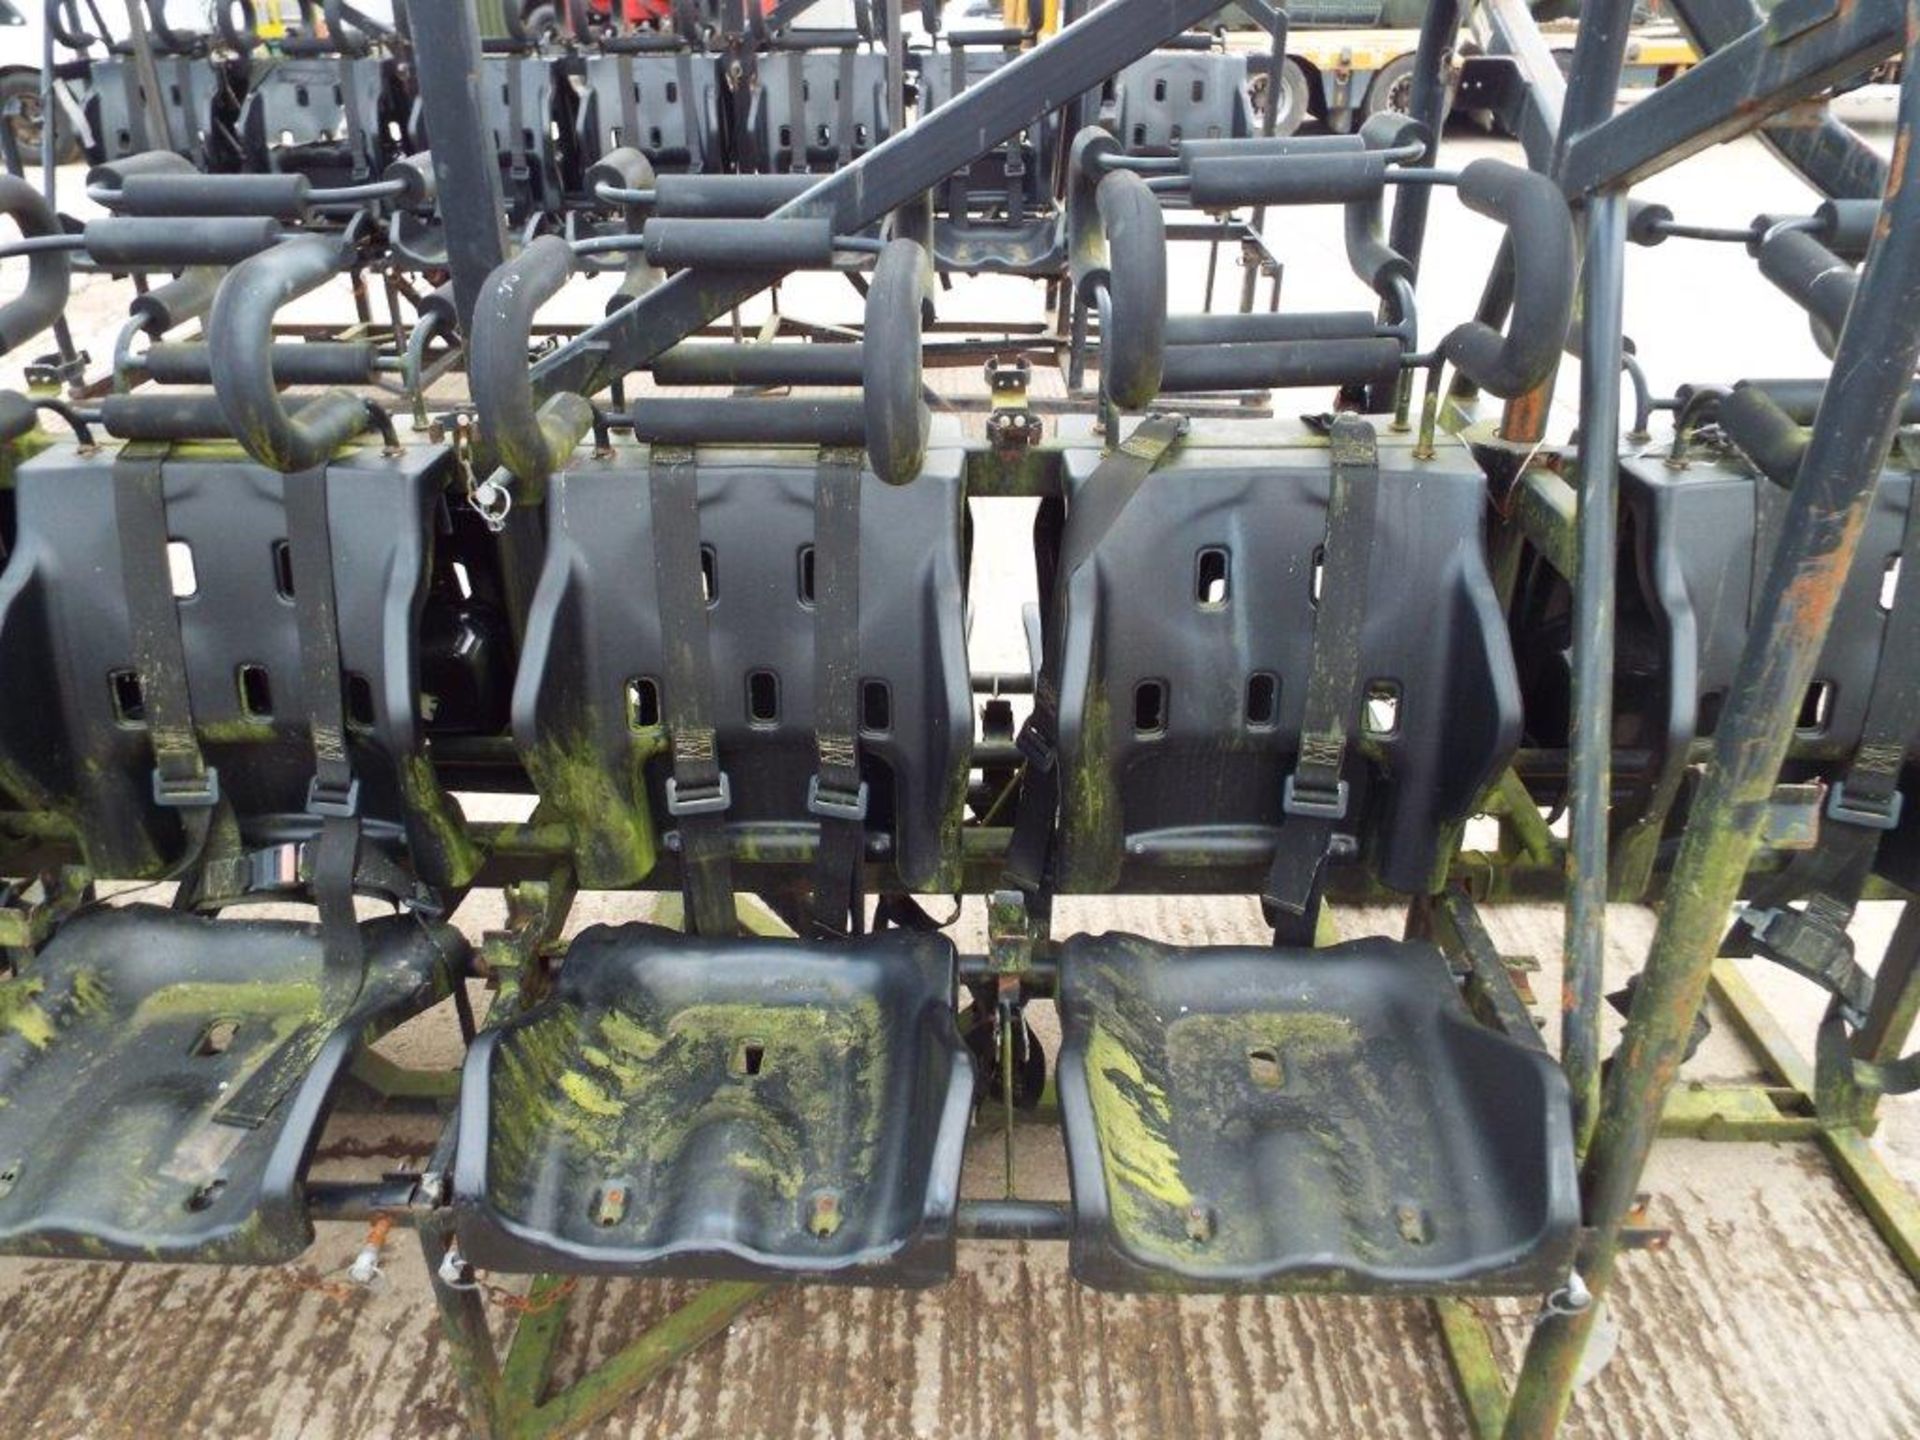 14 Man Security Seat suitable for Leyland Dafs, Bedfords etc - Image 8 of 9